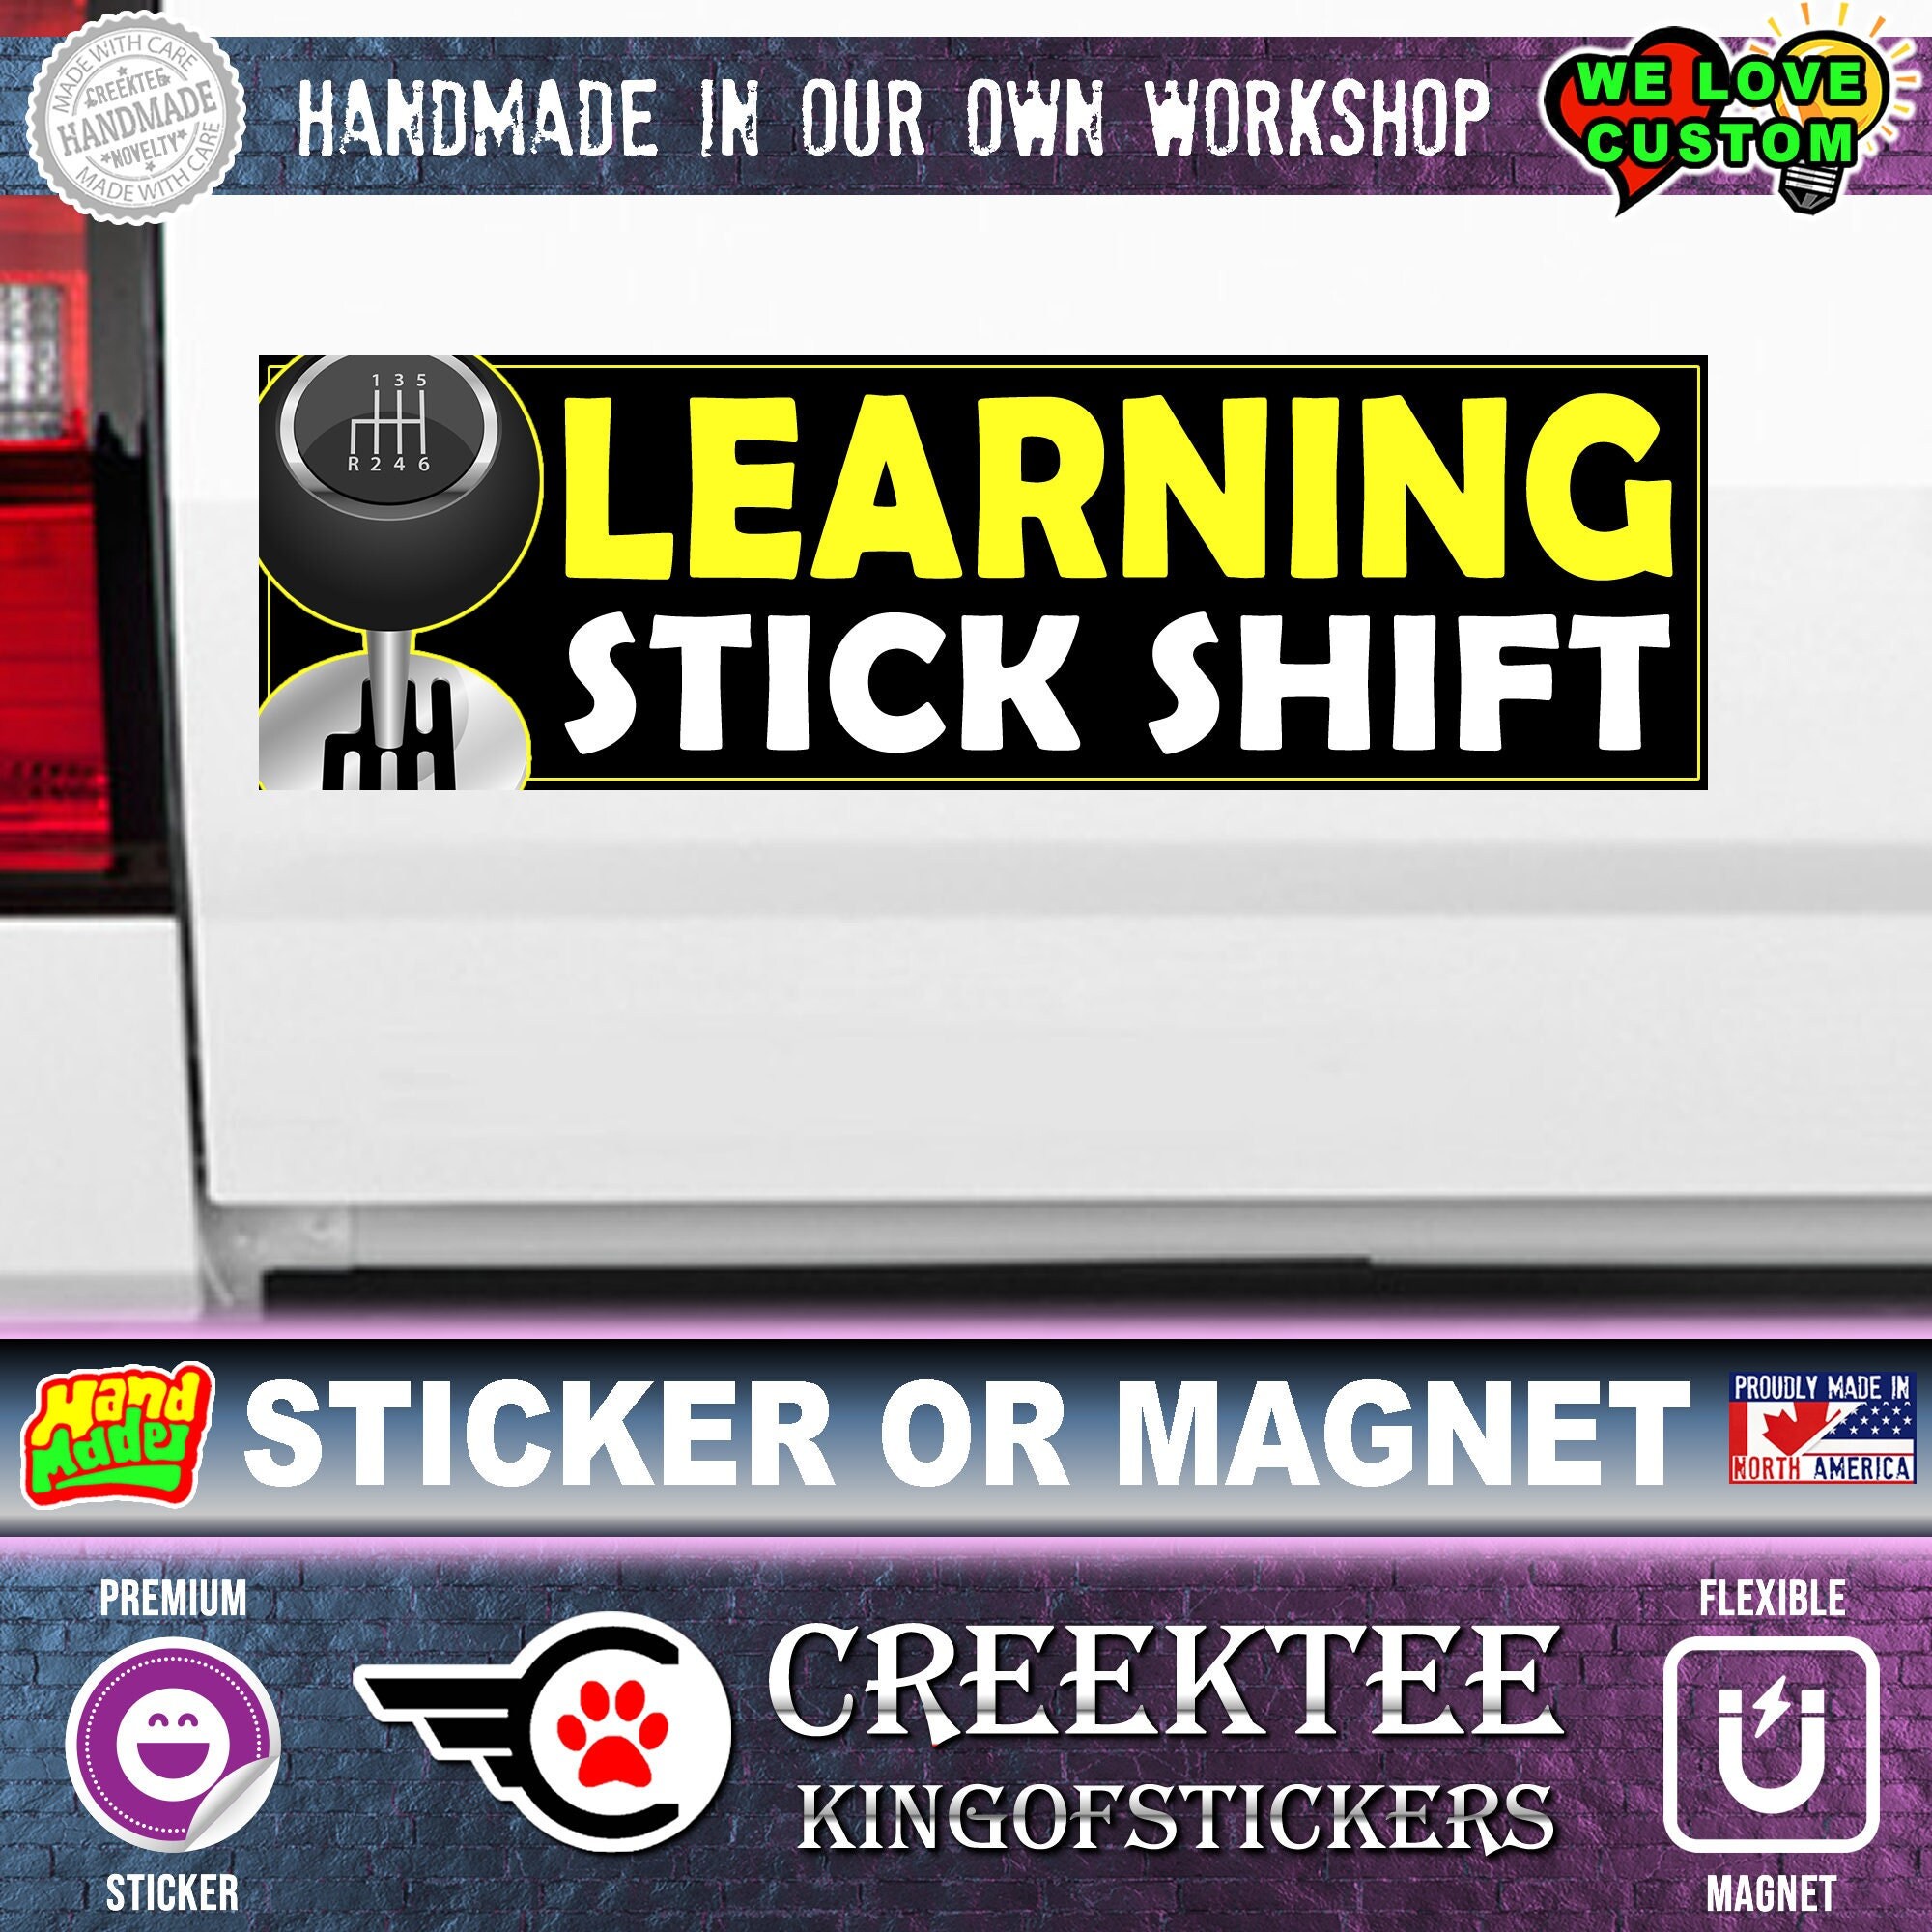 Learning Stick Shift Student Driver Bumper Sticker 10 x 3 Bumper Sticker or Magnetic Bumper Sticker Available